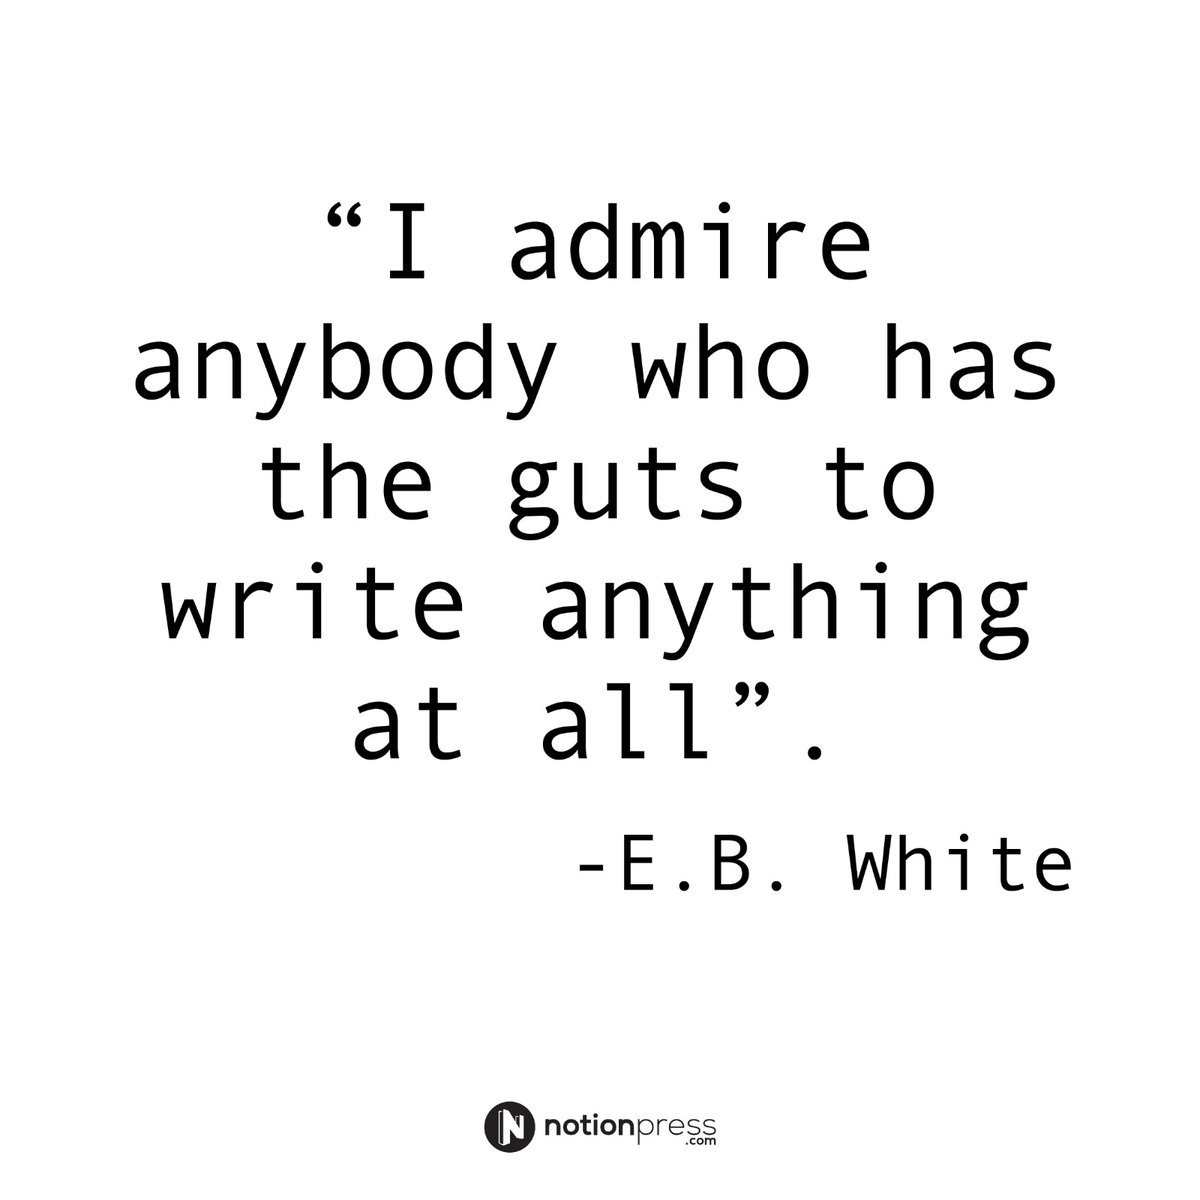 Here is our admiration for all the writers out there.